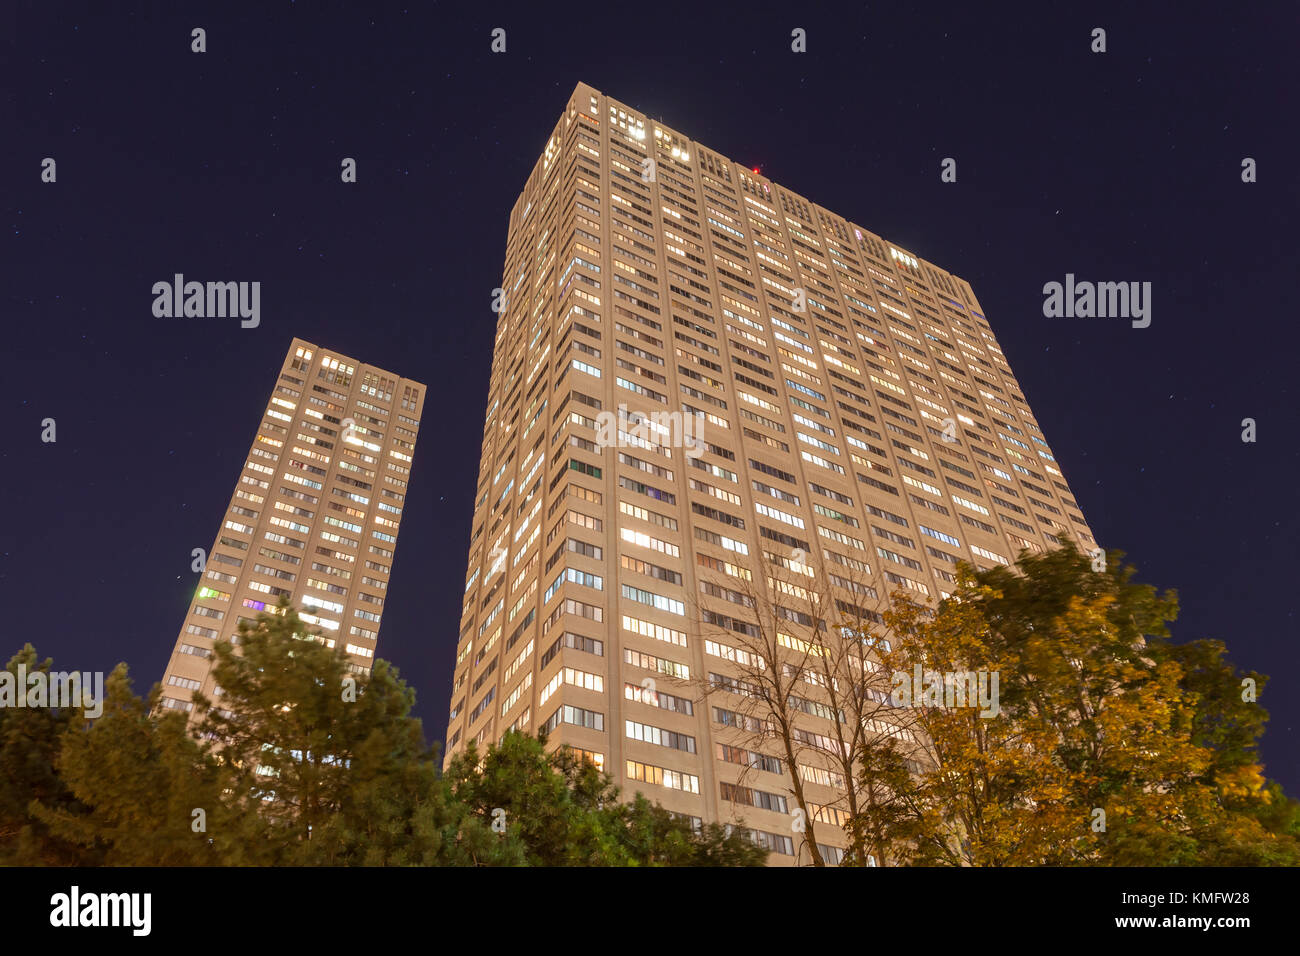 Highrise residential buildings at night Stock Photo